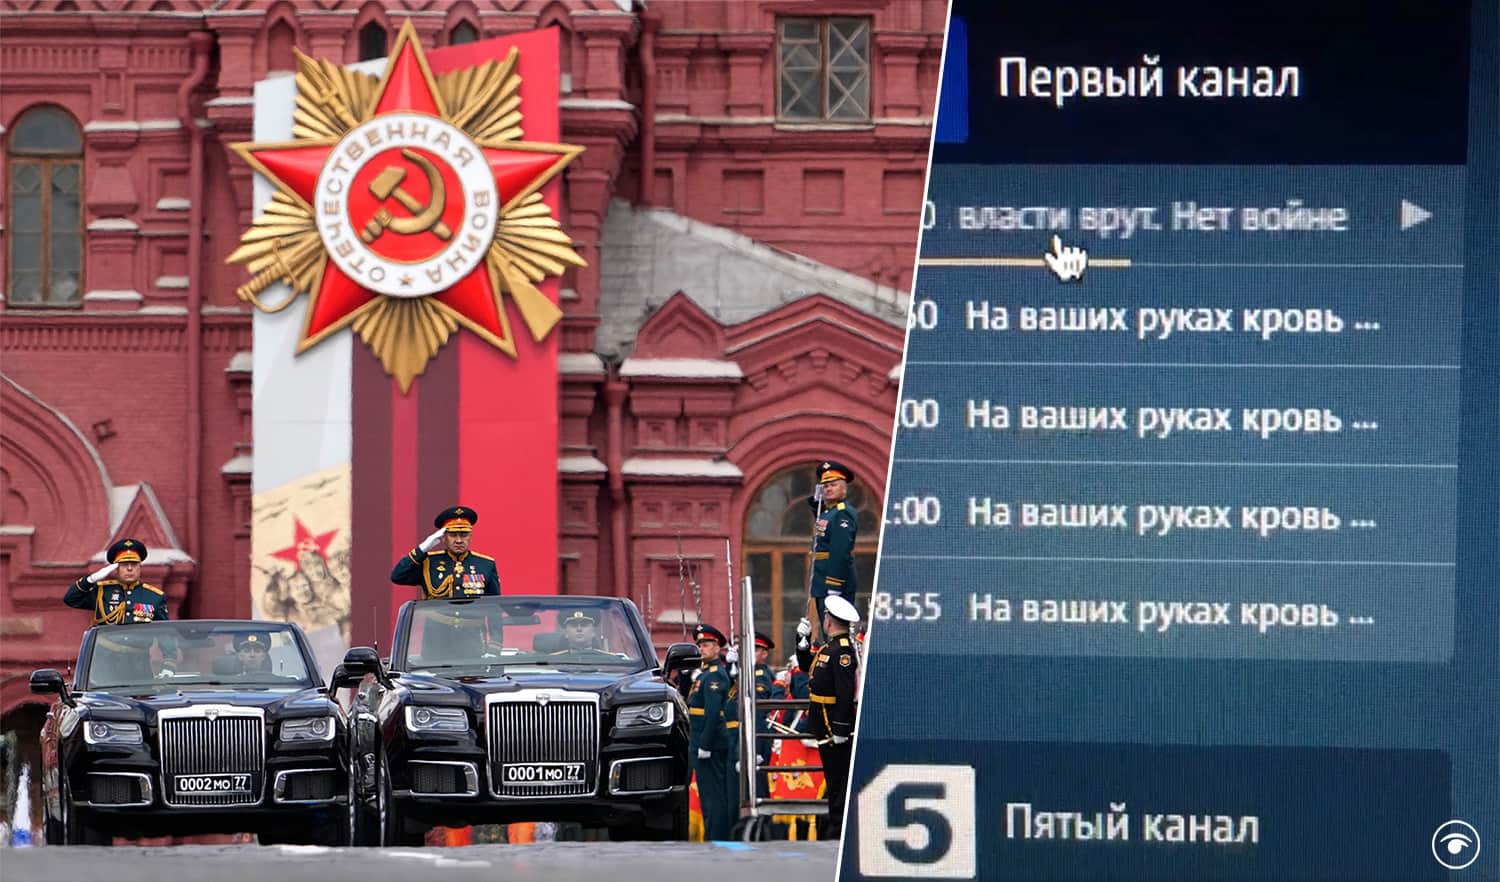 ‘The authorities are lying’: Russian TV schedule page hacked on Victory Day